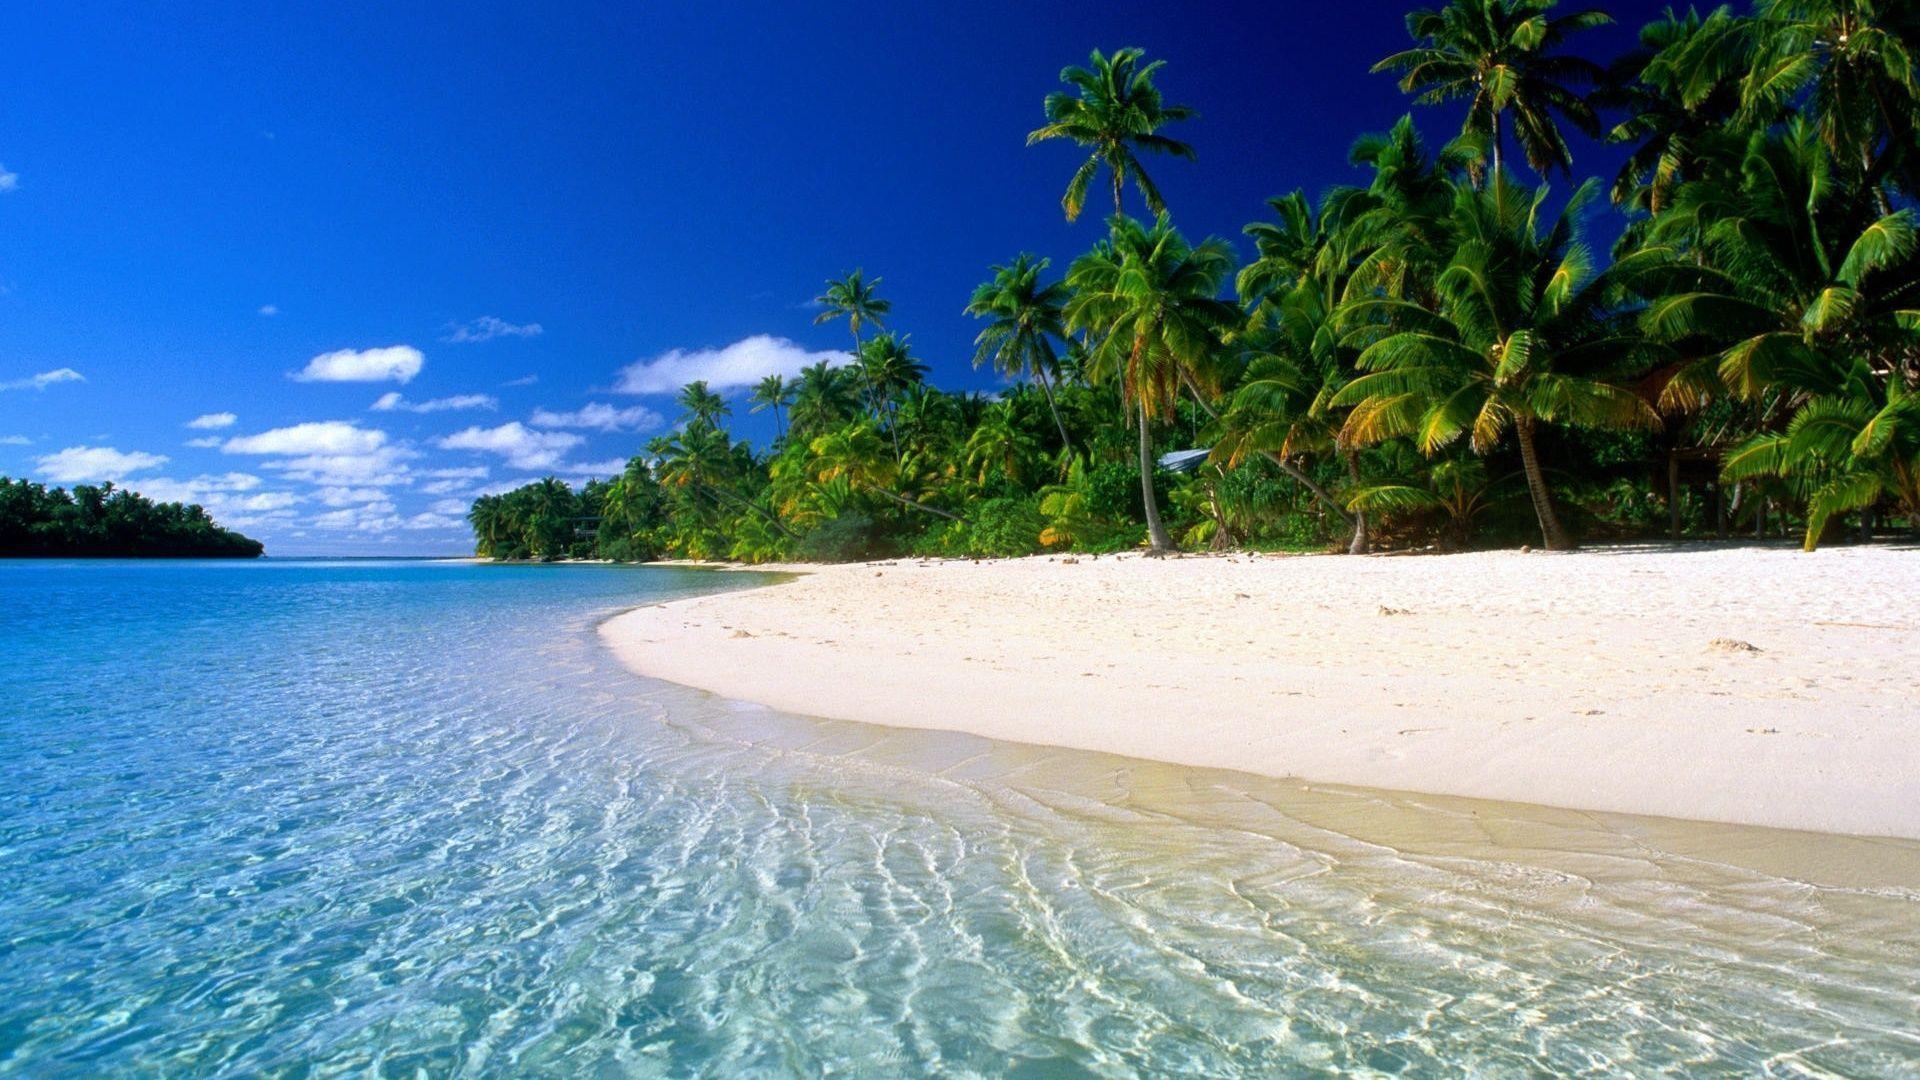 Wallpapers For > Beach Wallpapers Hd 1920x1080